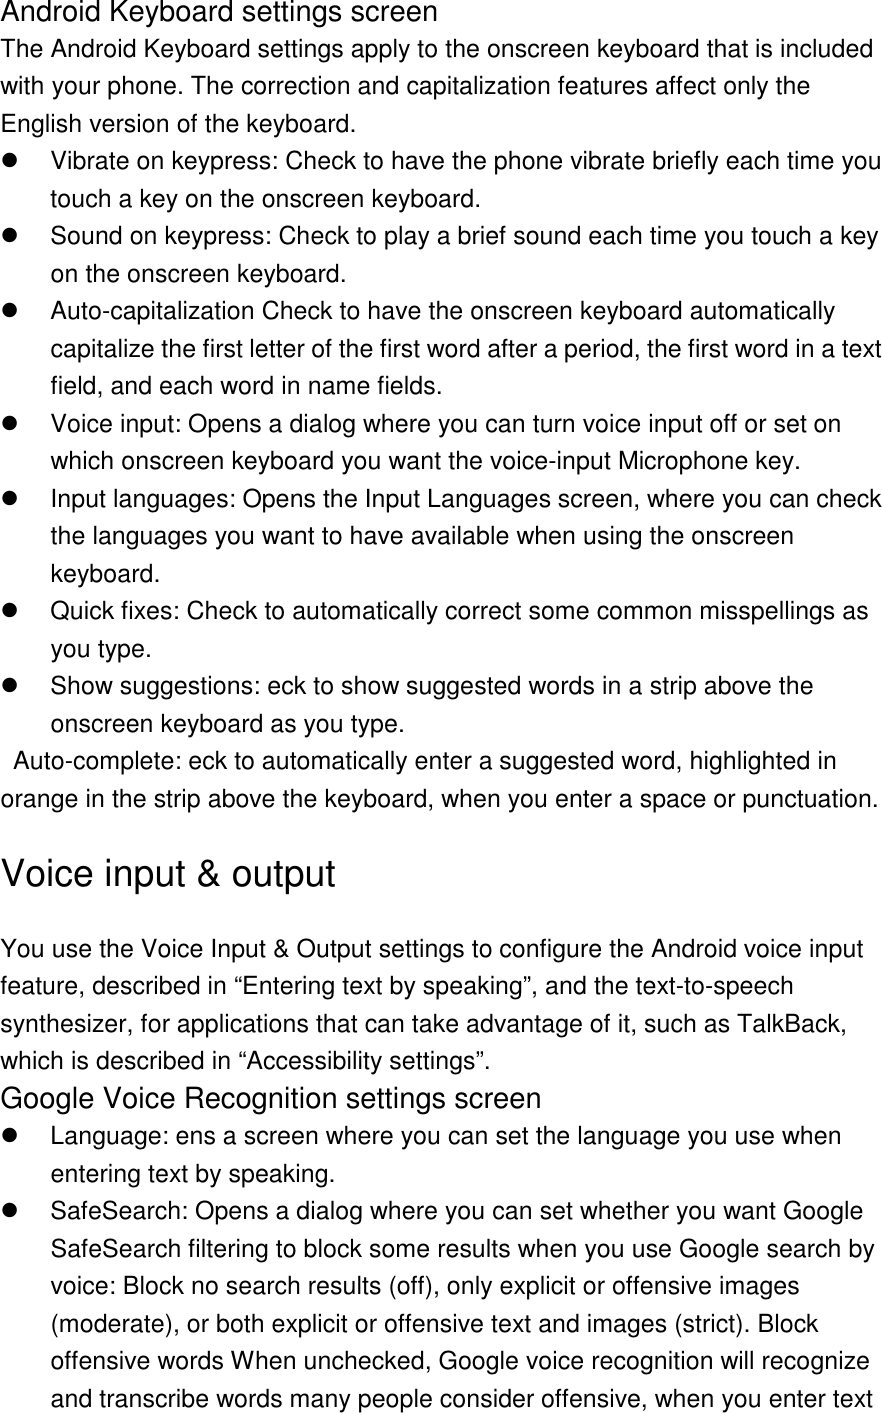 Android Keyboard settings screen The Android Keyboard settings apply to the onscreen keyboard that is included with your phone. The correction and capitalization features affect only the English version of the keyboard.   Vibrate on keypress: Check to have the phone vibrate briefly each time you touch a key on the onscreen keyboard.   Sound on keypress: Check to play a brief sound each time you touch a key on the onscreen keyboard.   Auto-capitalization Check to have the onscreen keyboard automatically capitalize the first letter of the first word after a period, the first word in a text field, and each word in name fields.   Voice input: Opens a dialog where you can turn voice input off or set on which onscreen keyboard you want the voice-input Microphone key.   Input languages: Opens the Input Languages screen, where you can check the languages you want to have available when using the onscreen keyboard.   Quick fixes: Check to automatically correct some common misspellings as you type.   Show suggestions: eck to show suggested words in a strip above the onscreen keyboard as you type.   Auto-complete: eck to automatically enter a suggested word, highlighted in orange in the strip above the keyboard, when you enter a space or punctuation.   Voice input &amp; output You use the Voice Input &amp; Output settings to configure the Android voice input feature, described in “Entering text by speaking”, and the text-to-speech synthesizer, for applications that can take advantage of it, such as TalkBack, which is described in “Accessibility settings”. Google Voice Recognition settings screen   Language: ens a screen where you can set the language you use when entering text by speaking.   SafeSearch: Opens a dialog where you can set whether you want Google SafeSearch filtering to block some results when you use Google search by voice: Block no search results (off), only explicit or offensive images (moderate), or both explicit or offensive text and images (strict). Block offensive words When unchecked, Google voice recognition will recognize and transcribe words many people consider offensive, when you enter text 